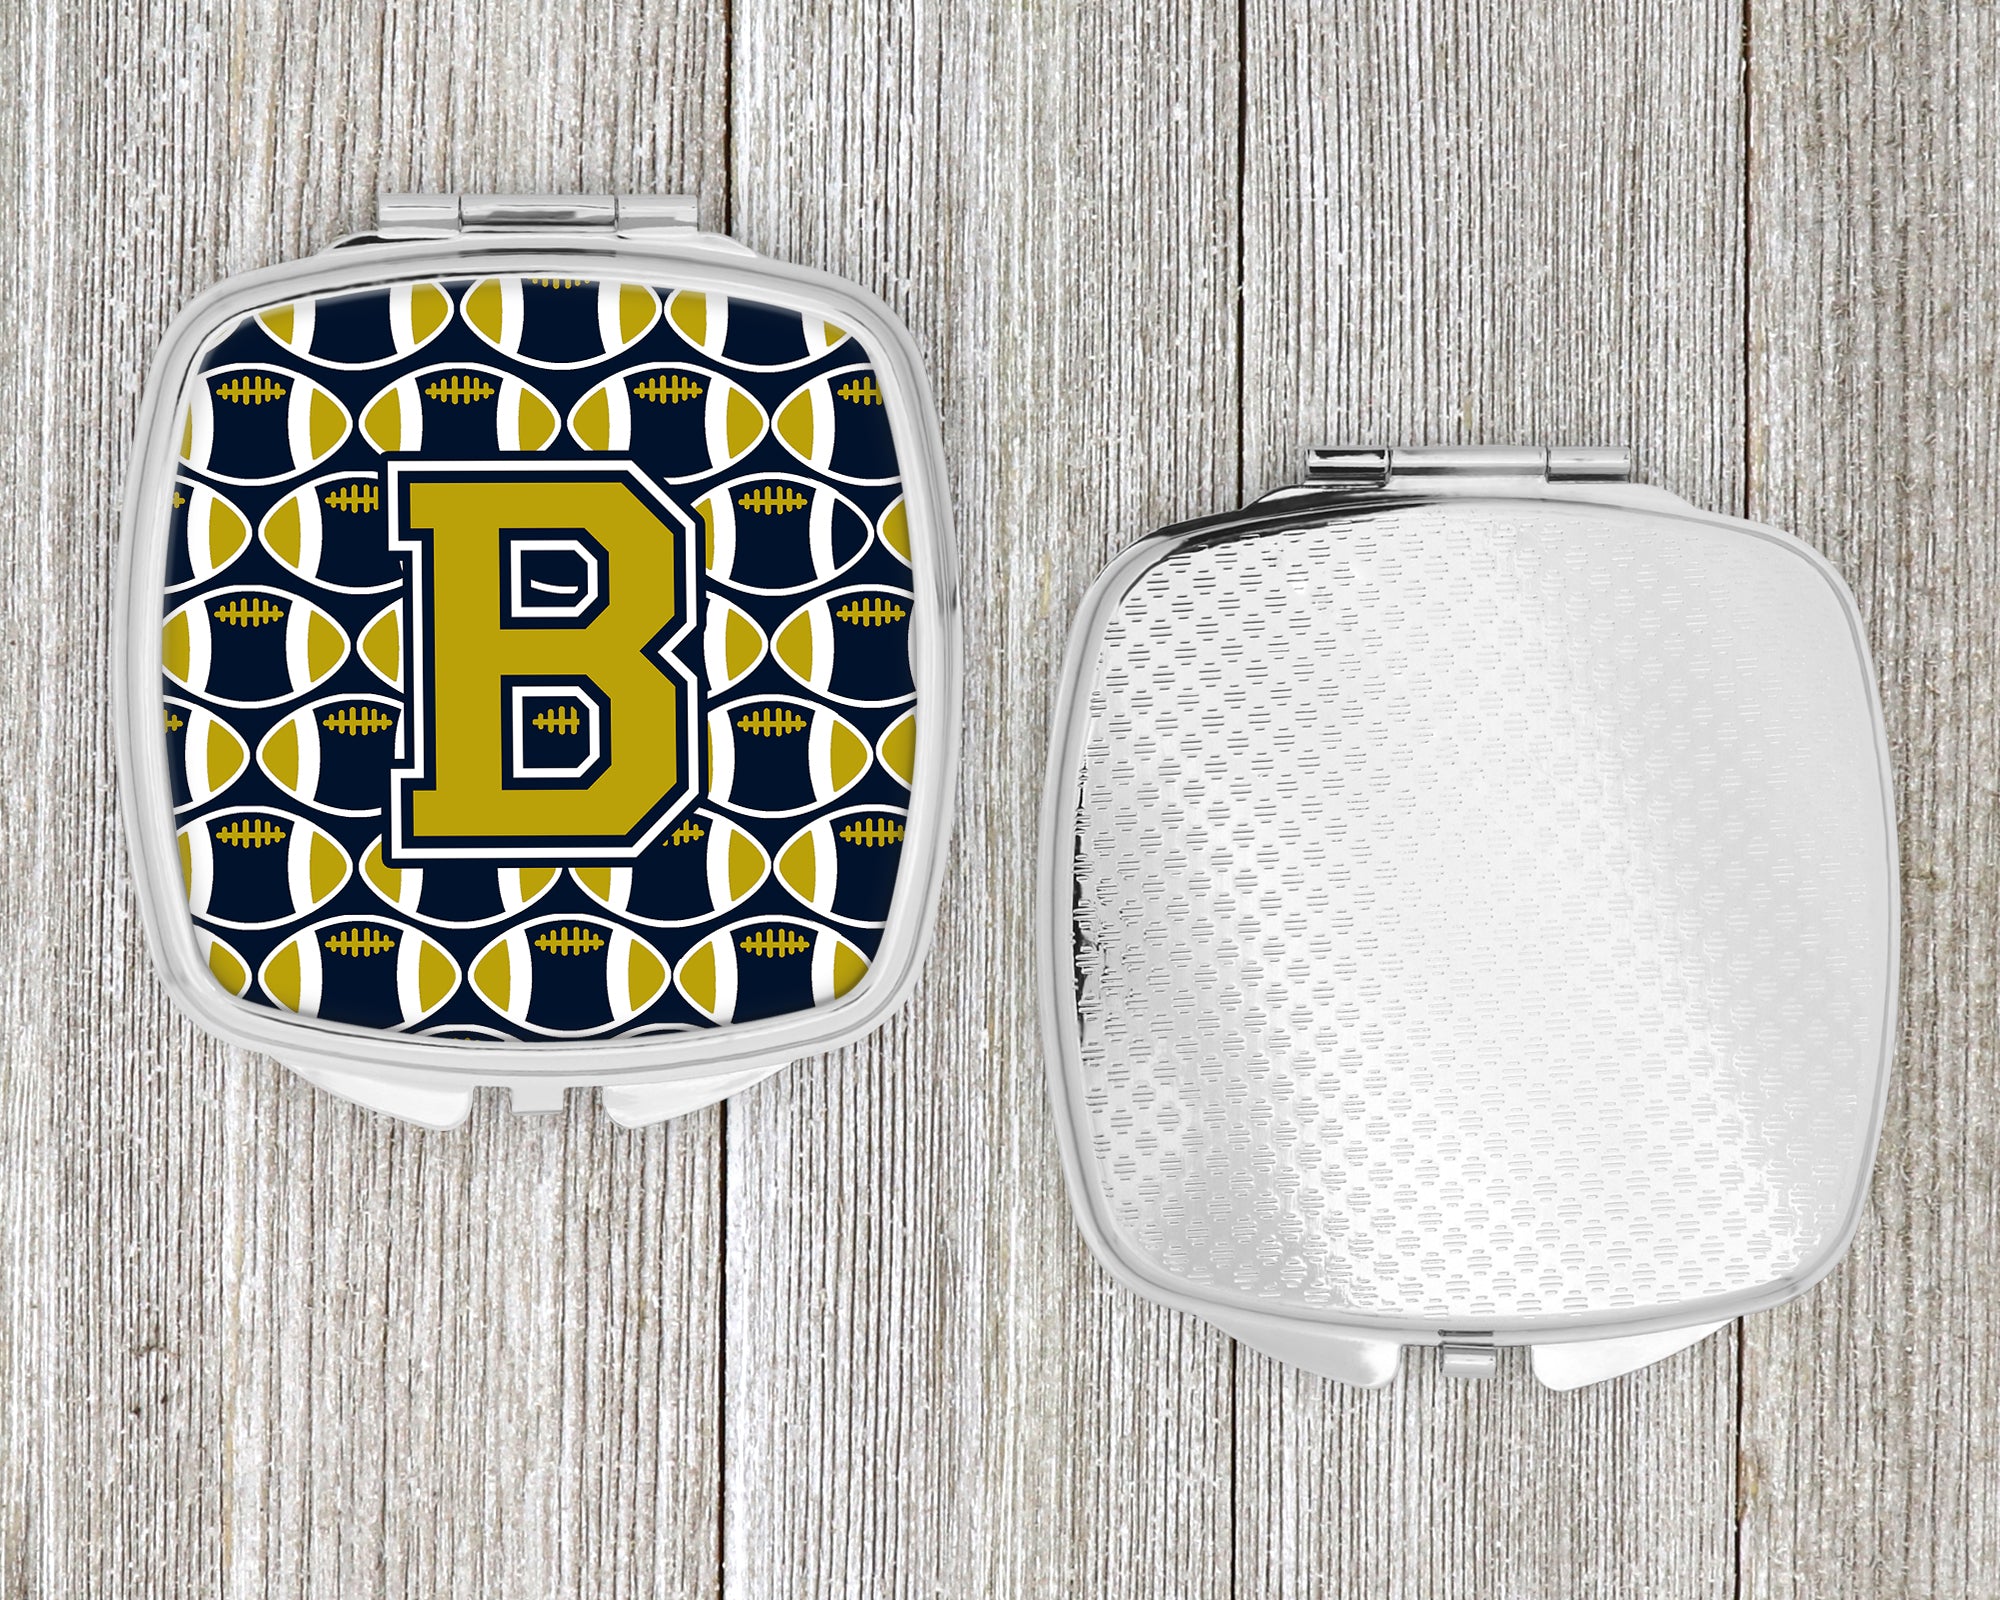 Letter B Football Blue and Gold Compact Mirror CJ1074-BSCM